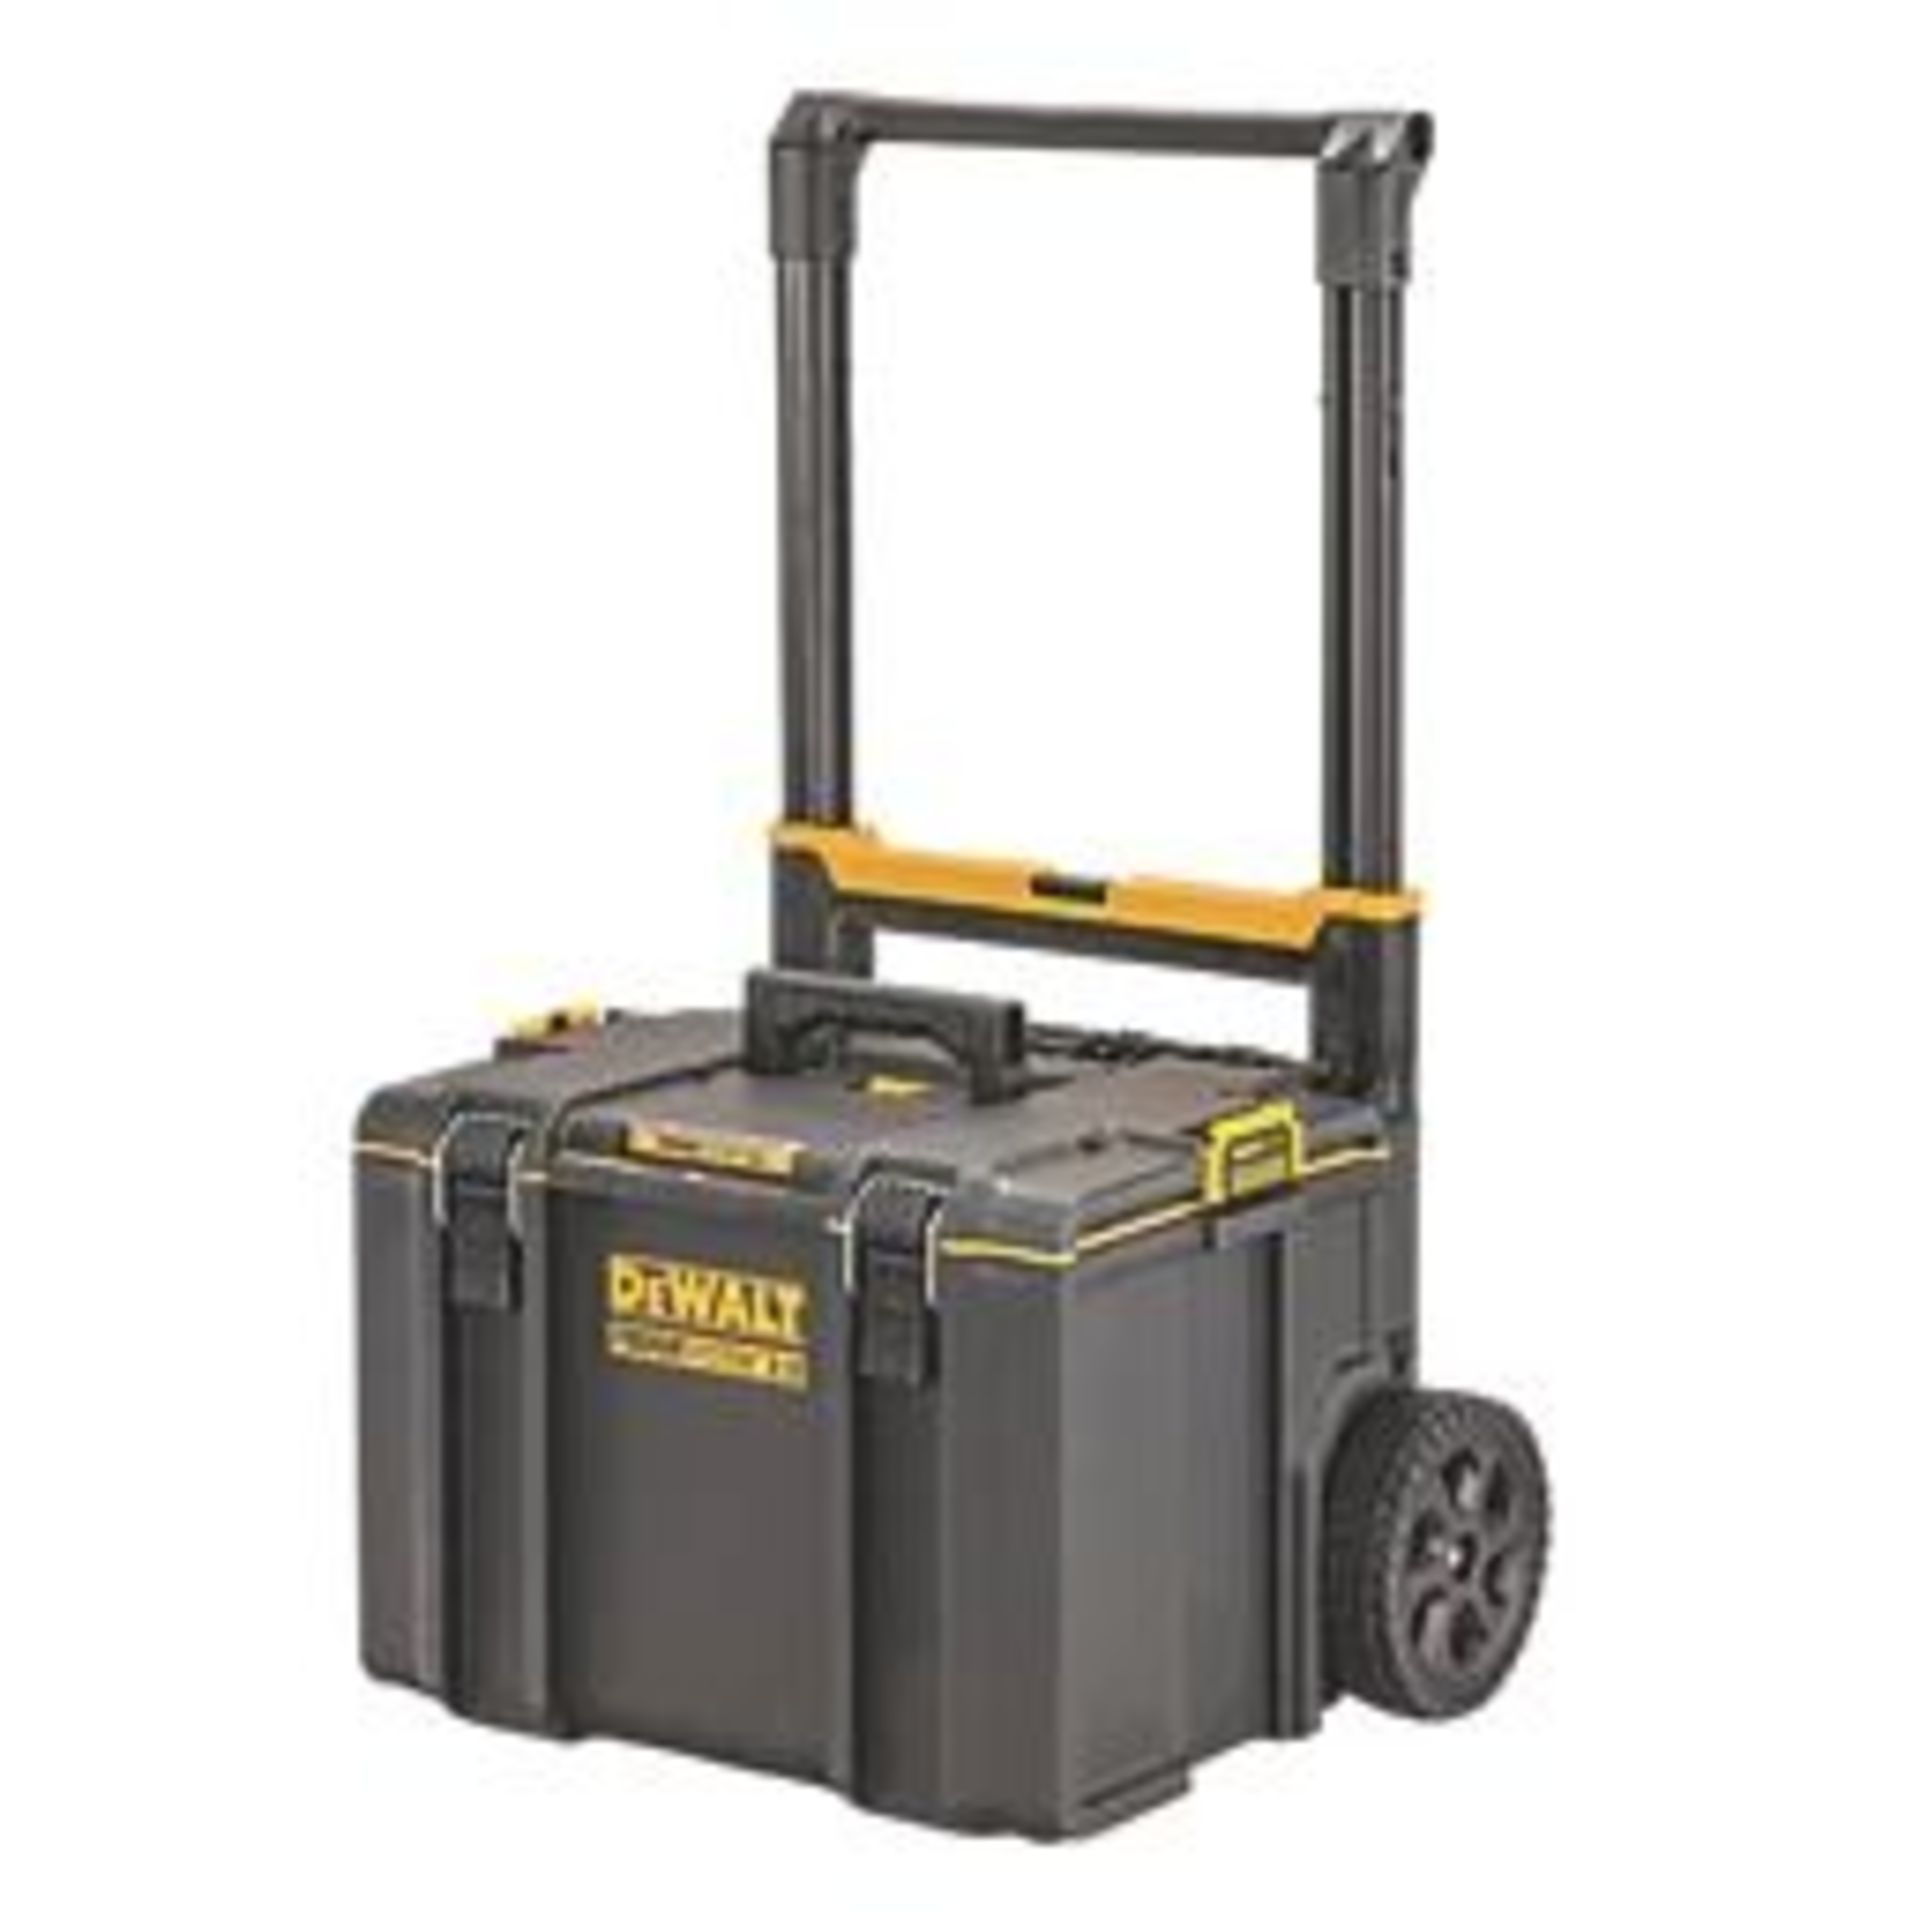 DEWALT TOUGHSYSTEM 2.0 TOOL BOX 20". - PW. Auto-connect side latches allow one-handed operation. 2-